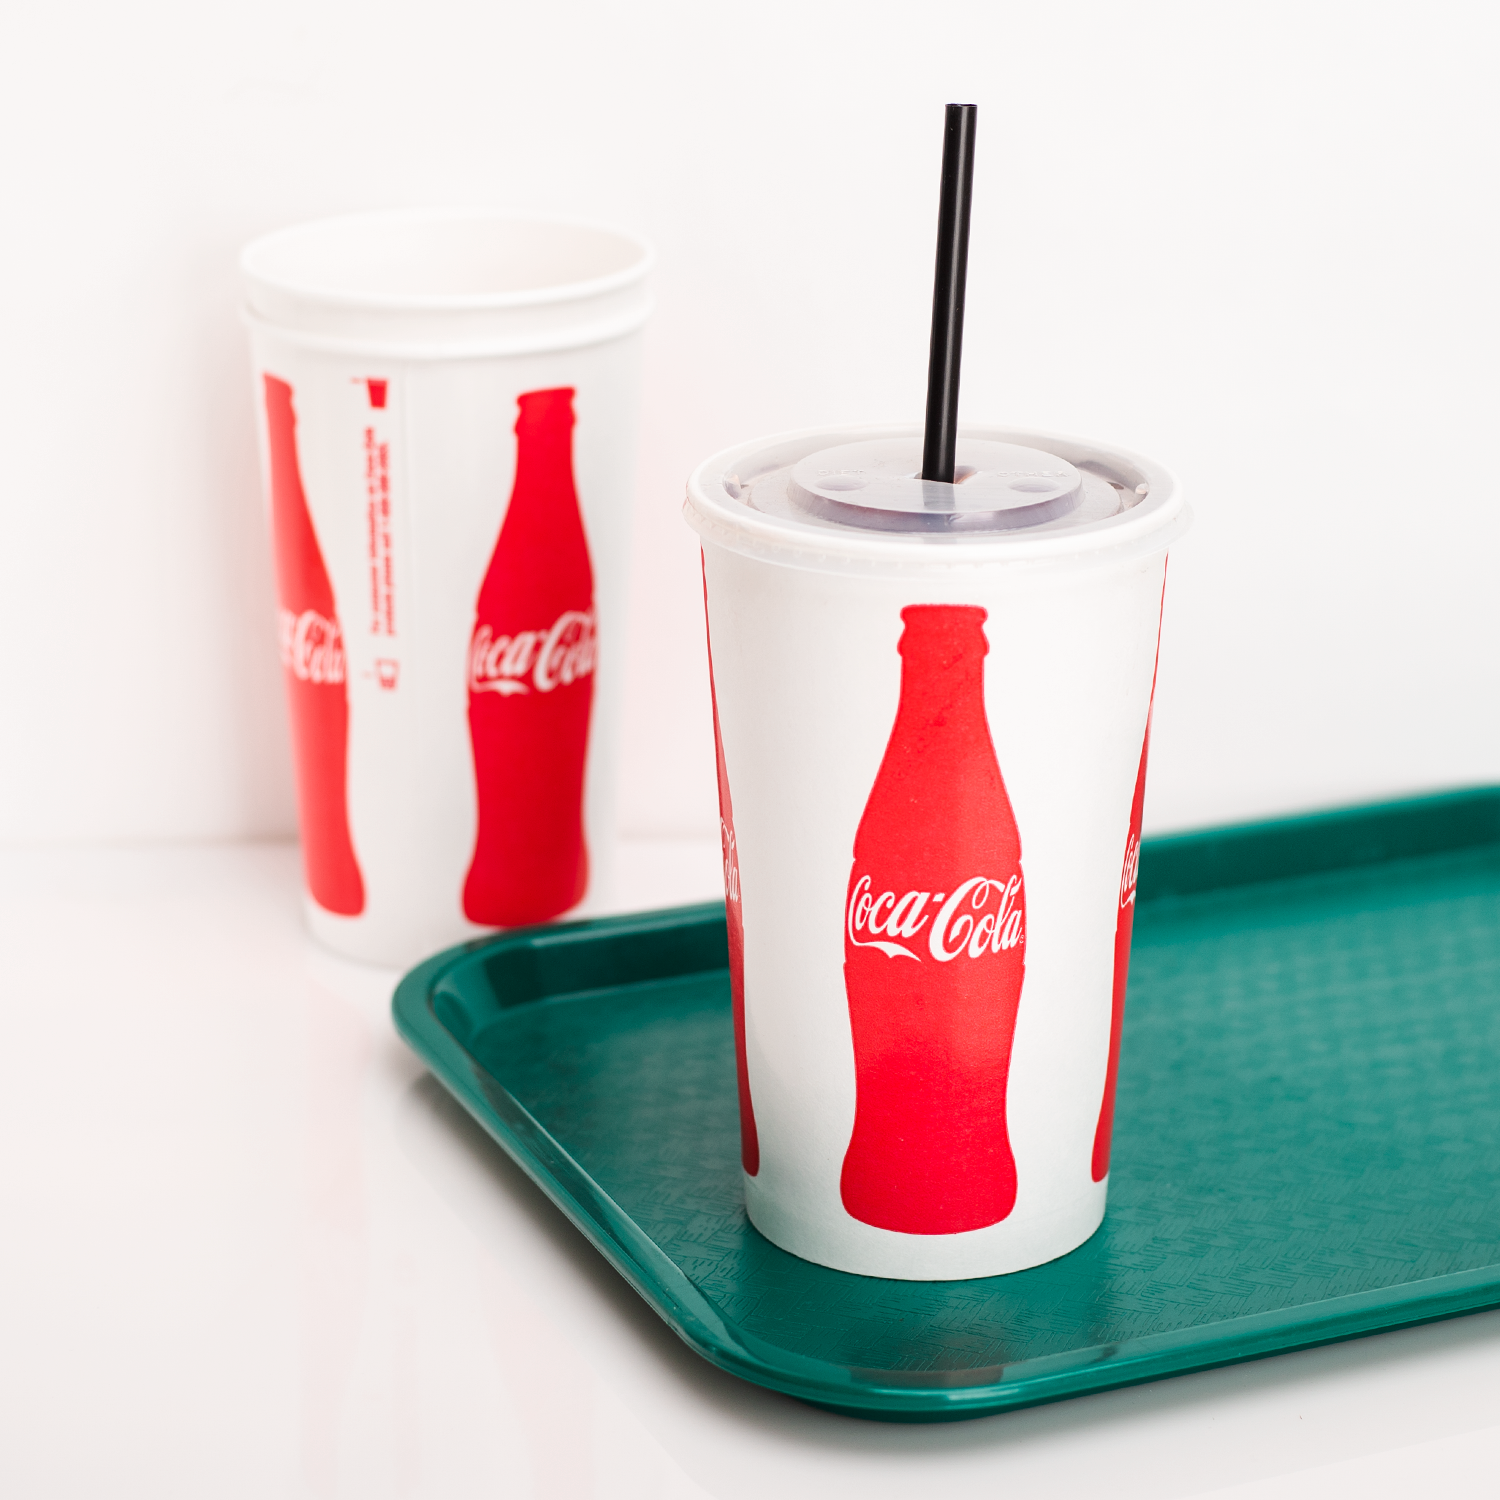 Coca Cola Print Karat 44oz Paper Cold Cups with flat lid, black straw, and serving tray